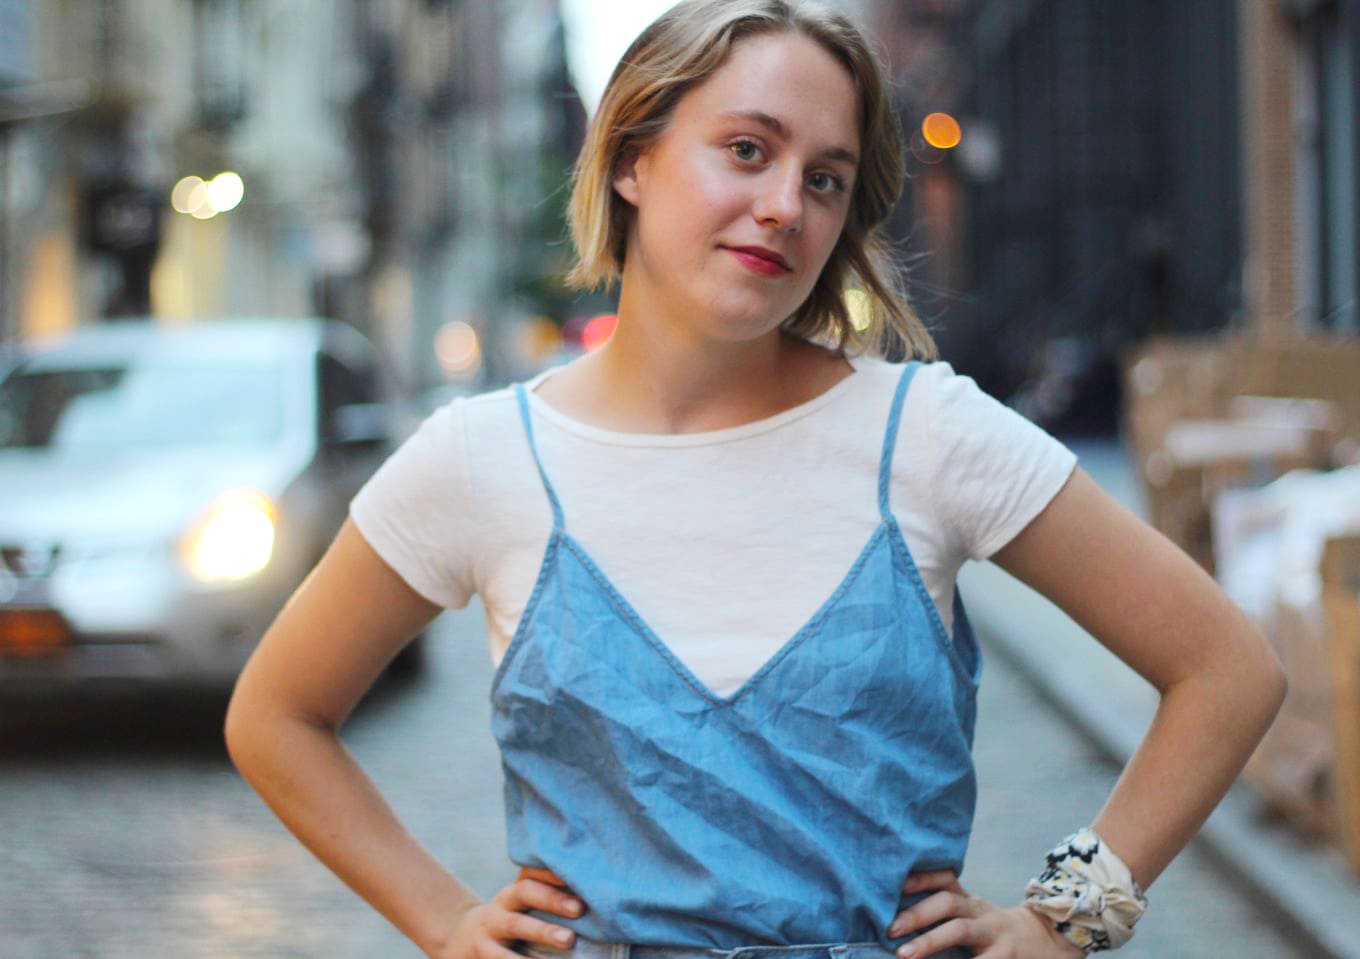 Summer fashion intern style - GWU student wears a blue cami over a white crew neck tee shirt and red lipstick